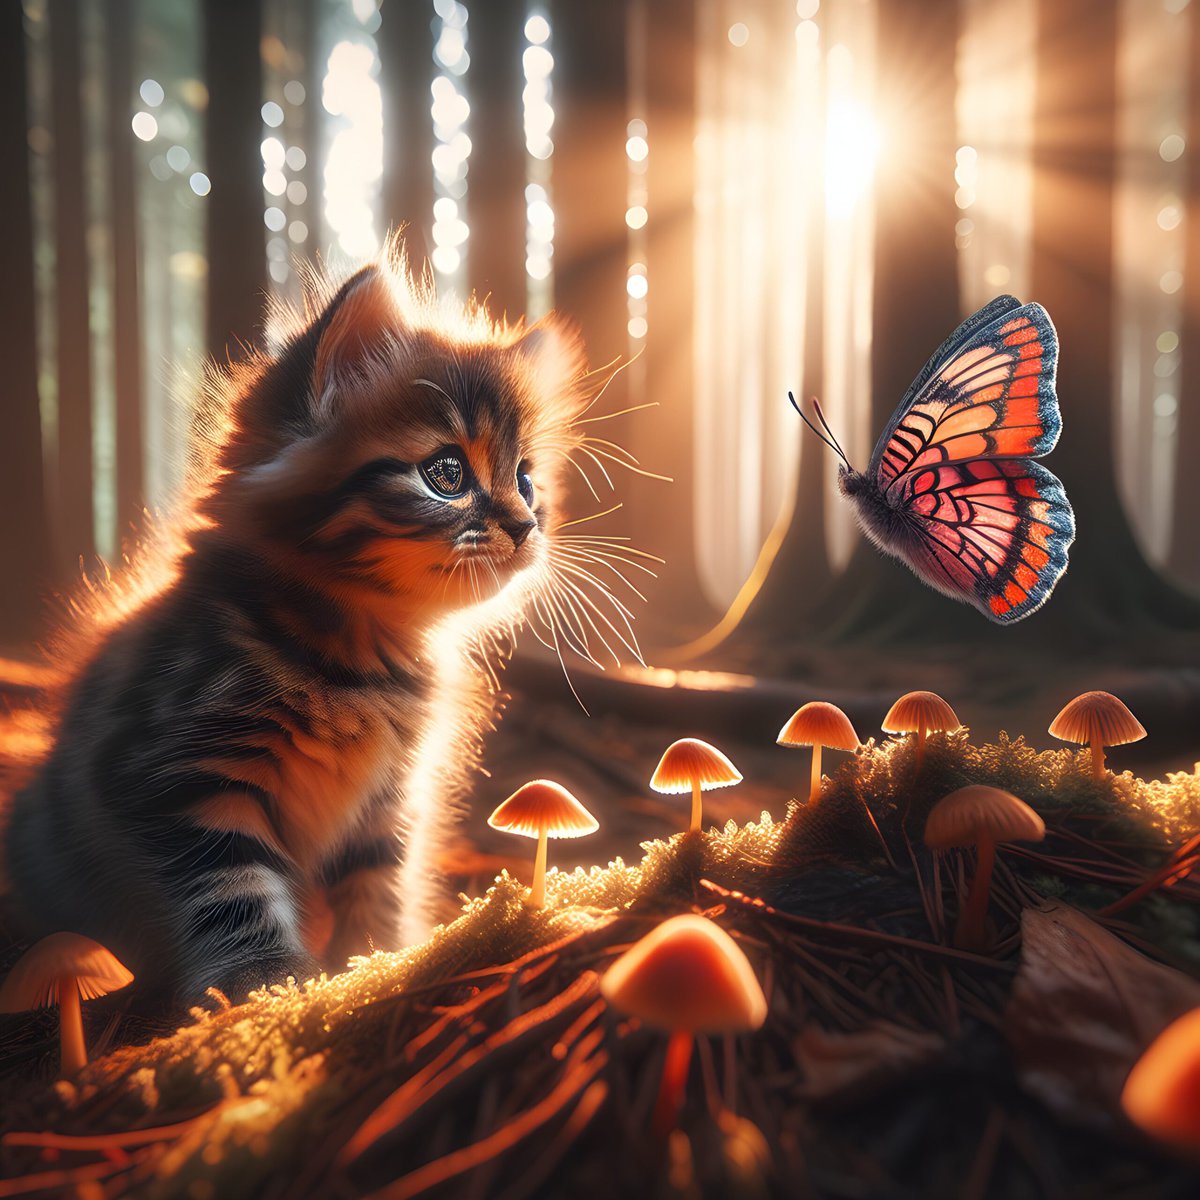 free cat pictures - AI image of a kitten in a forest with sun filtering through trees and a butterfly nearby